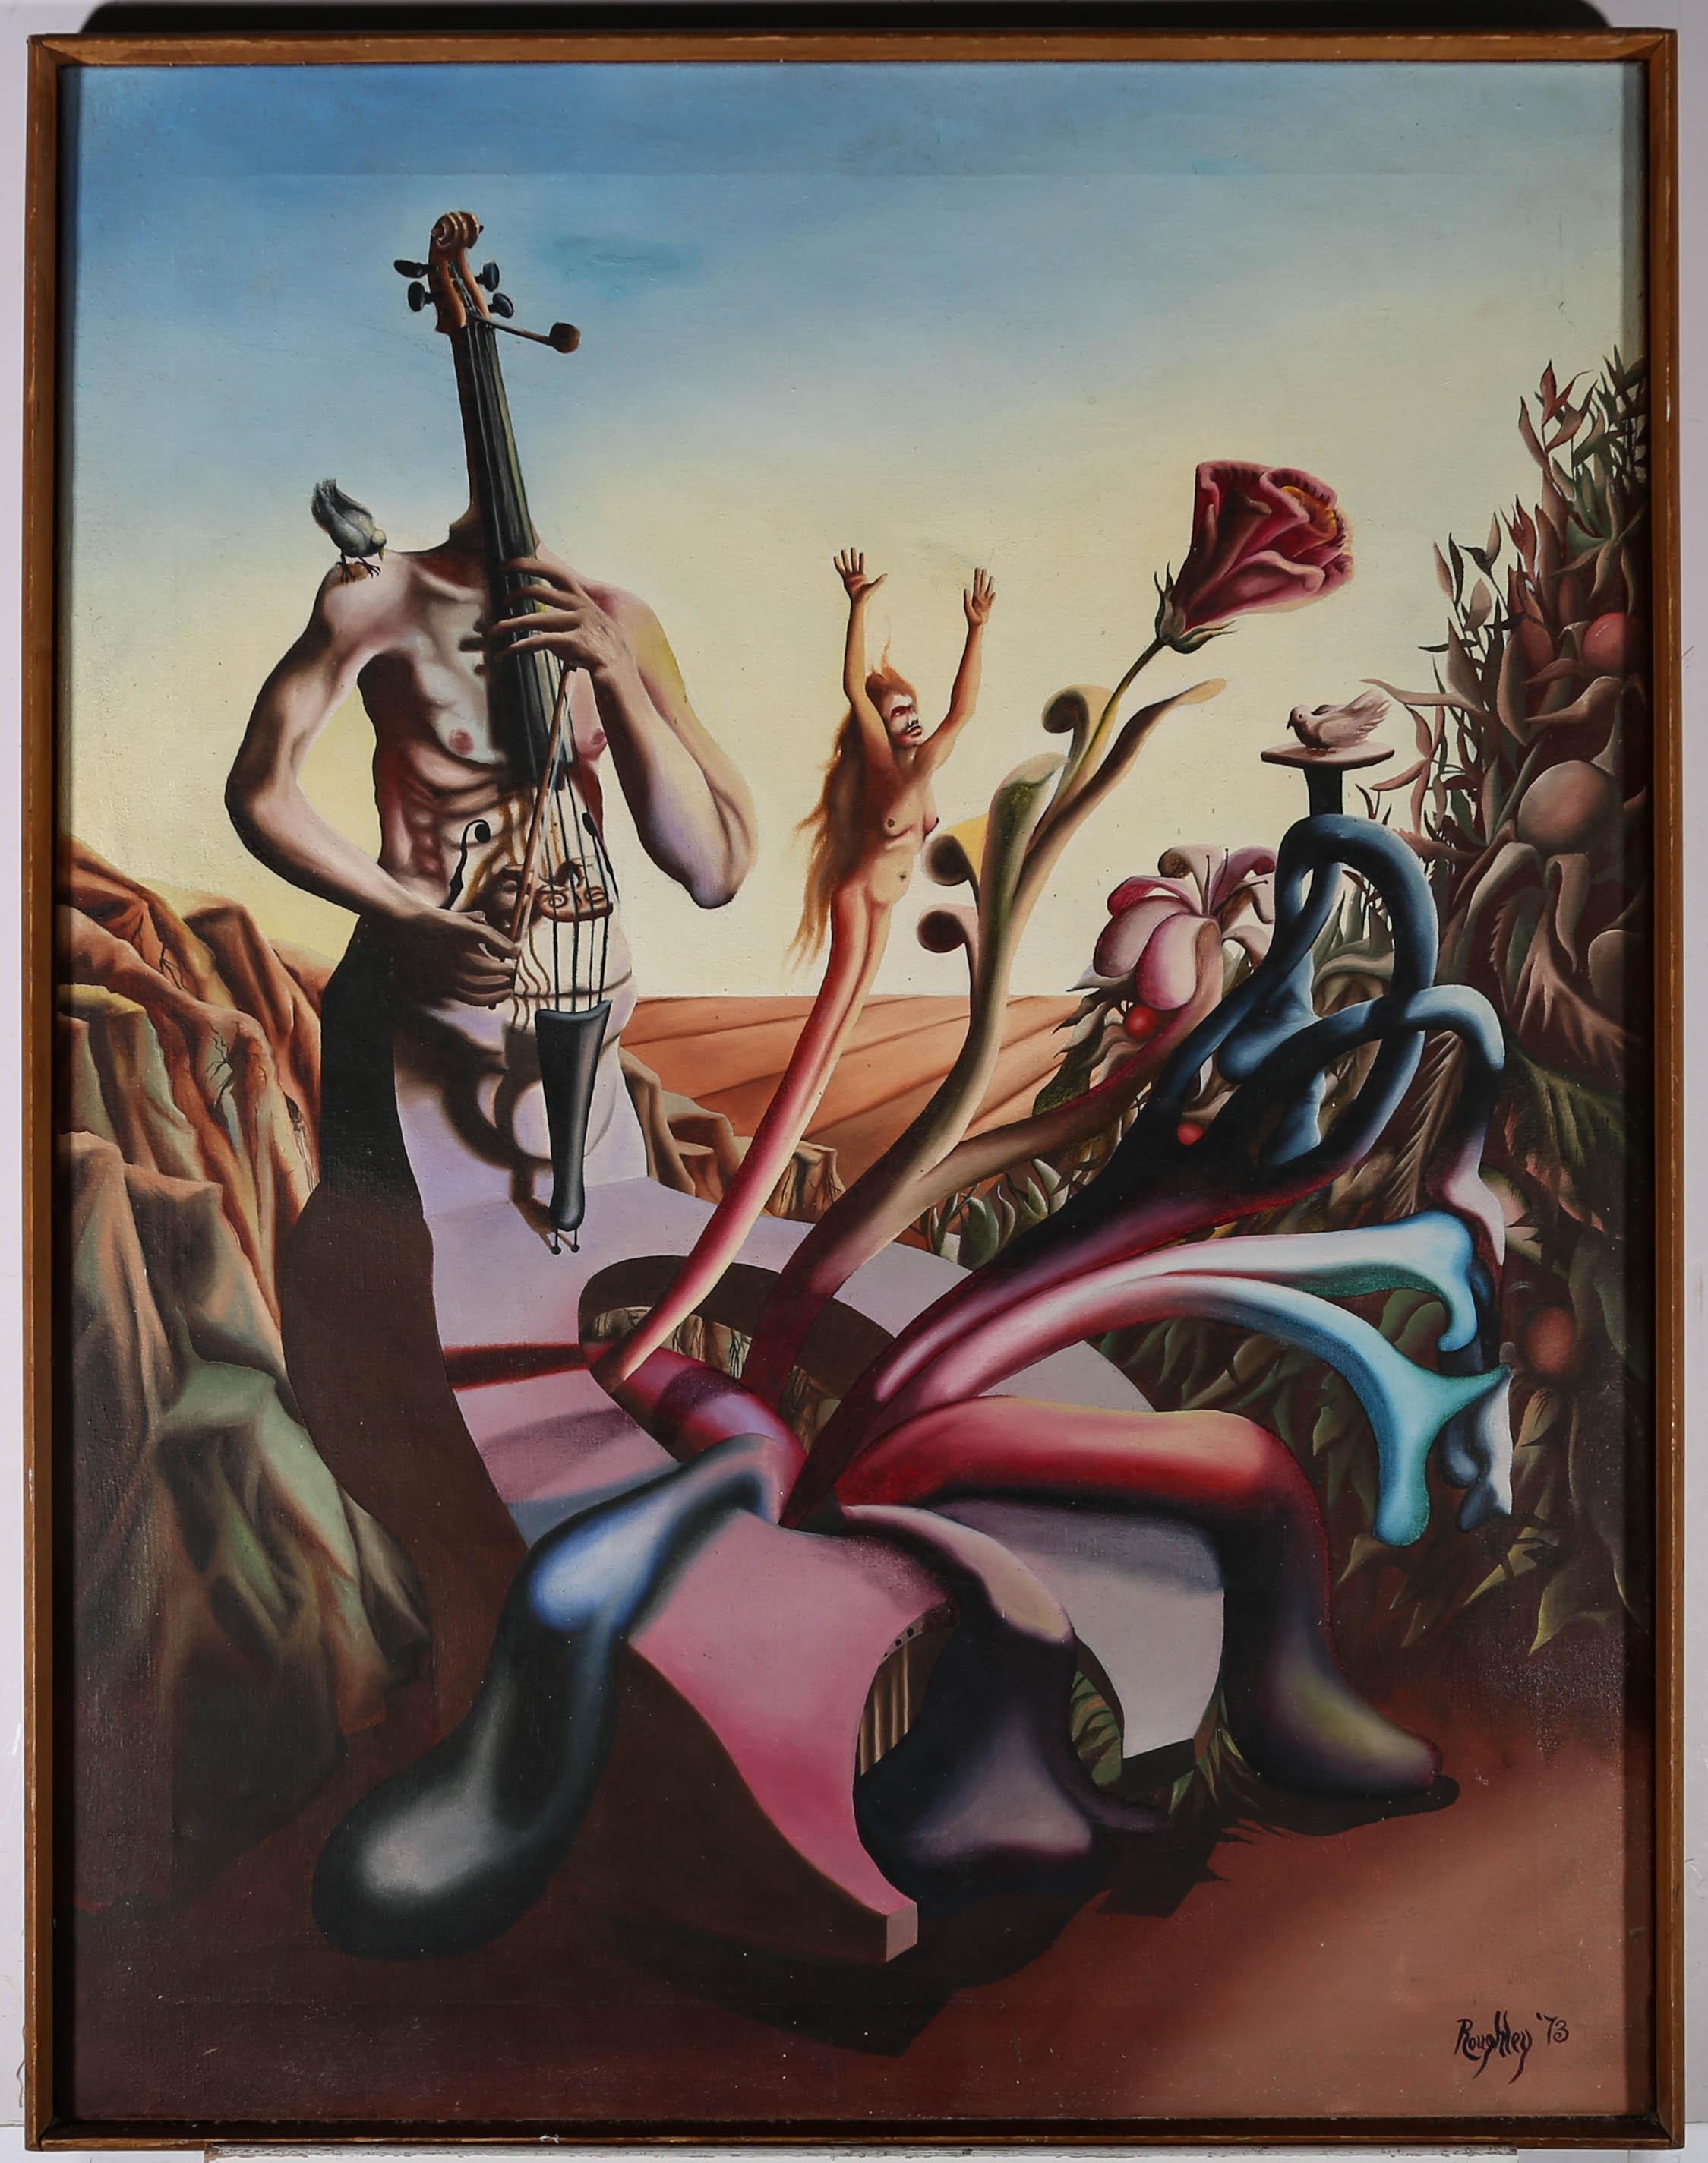 A bizarre and magical Surrealist composition in oil from the 1970s. The scene shows a strange human torso that morphs with a cello into a musical hybrid. Strange shapes pour out from the creature, a woman reaching for the sky, a red rose and a dove,